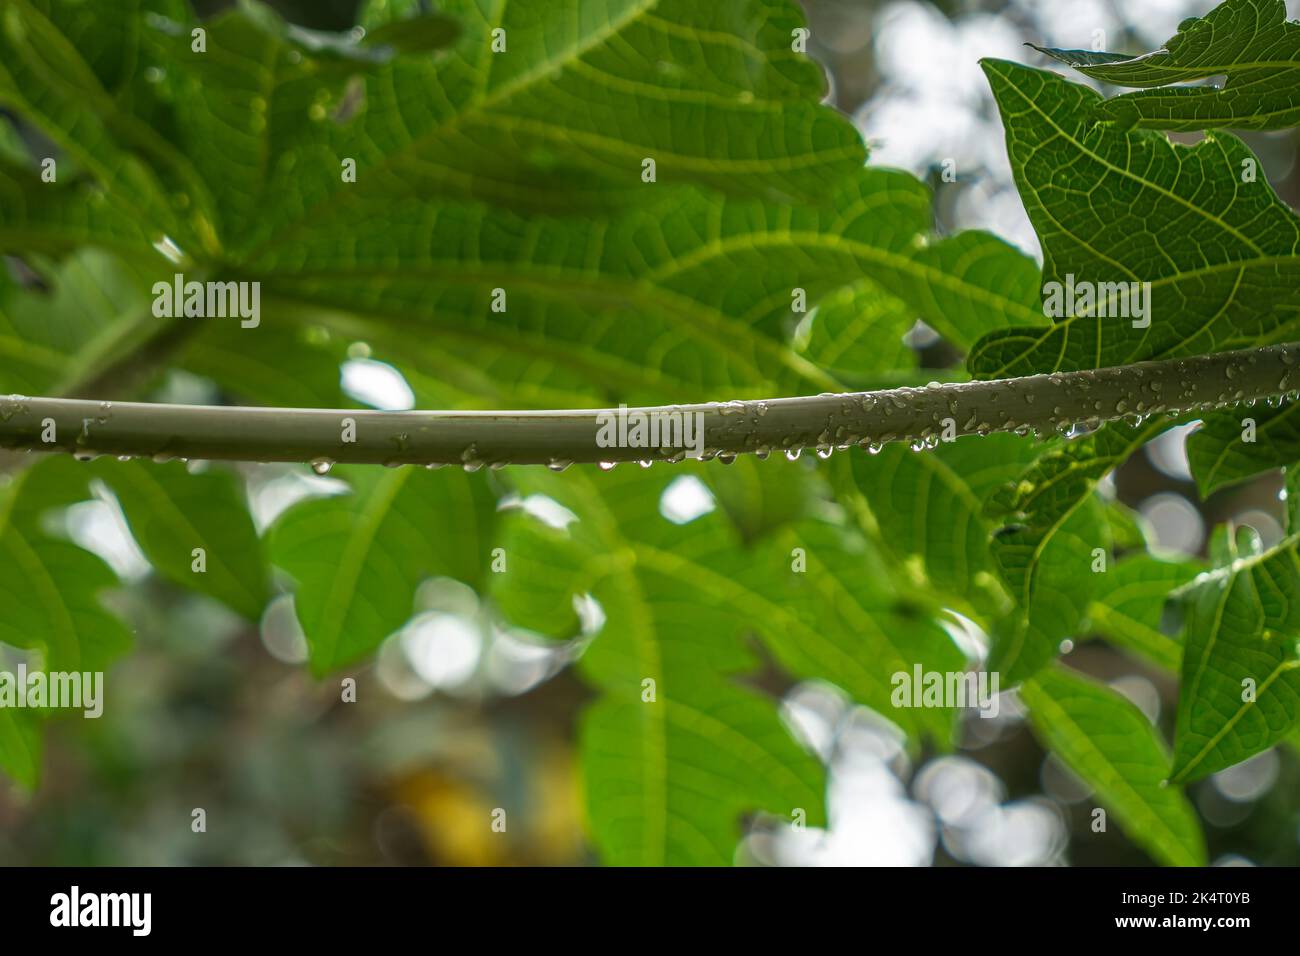 Papaya leaf stalks that are still wet with drops of morning dew on a sunny morning, have a blurry green foliage background Stock Photo